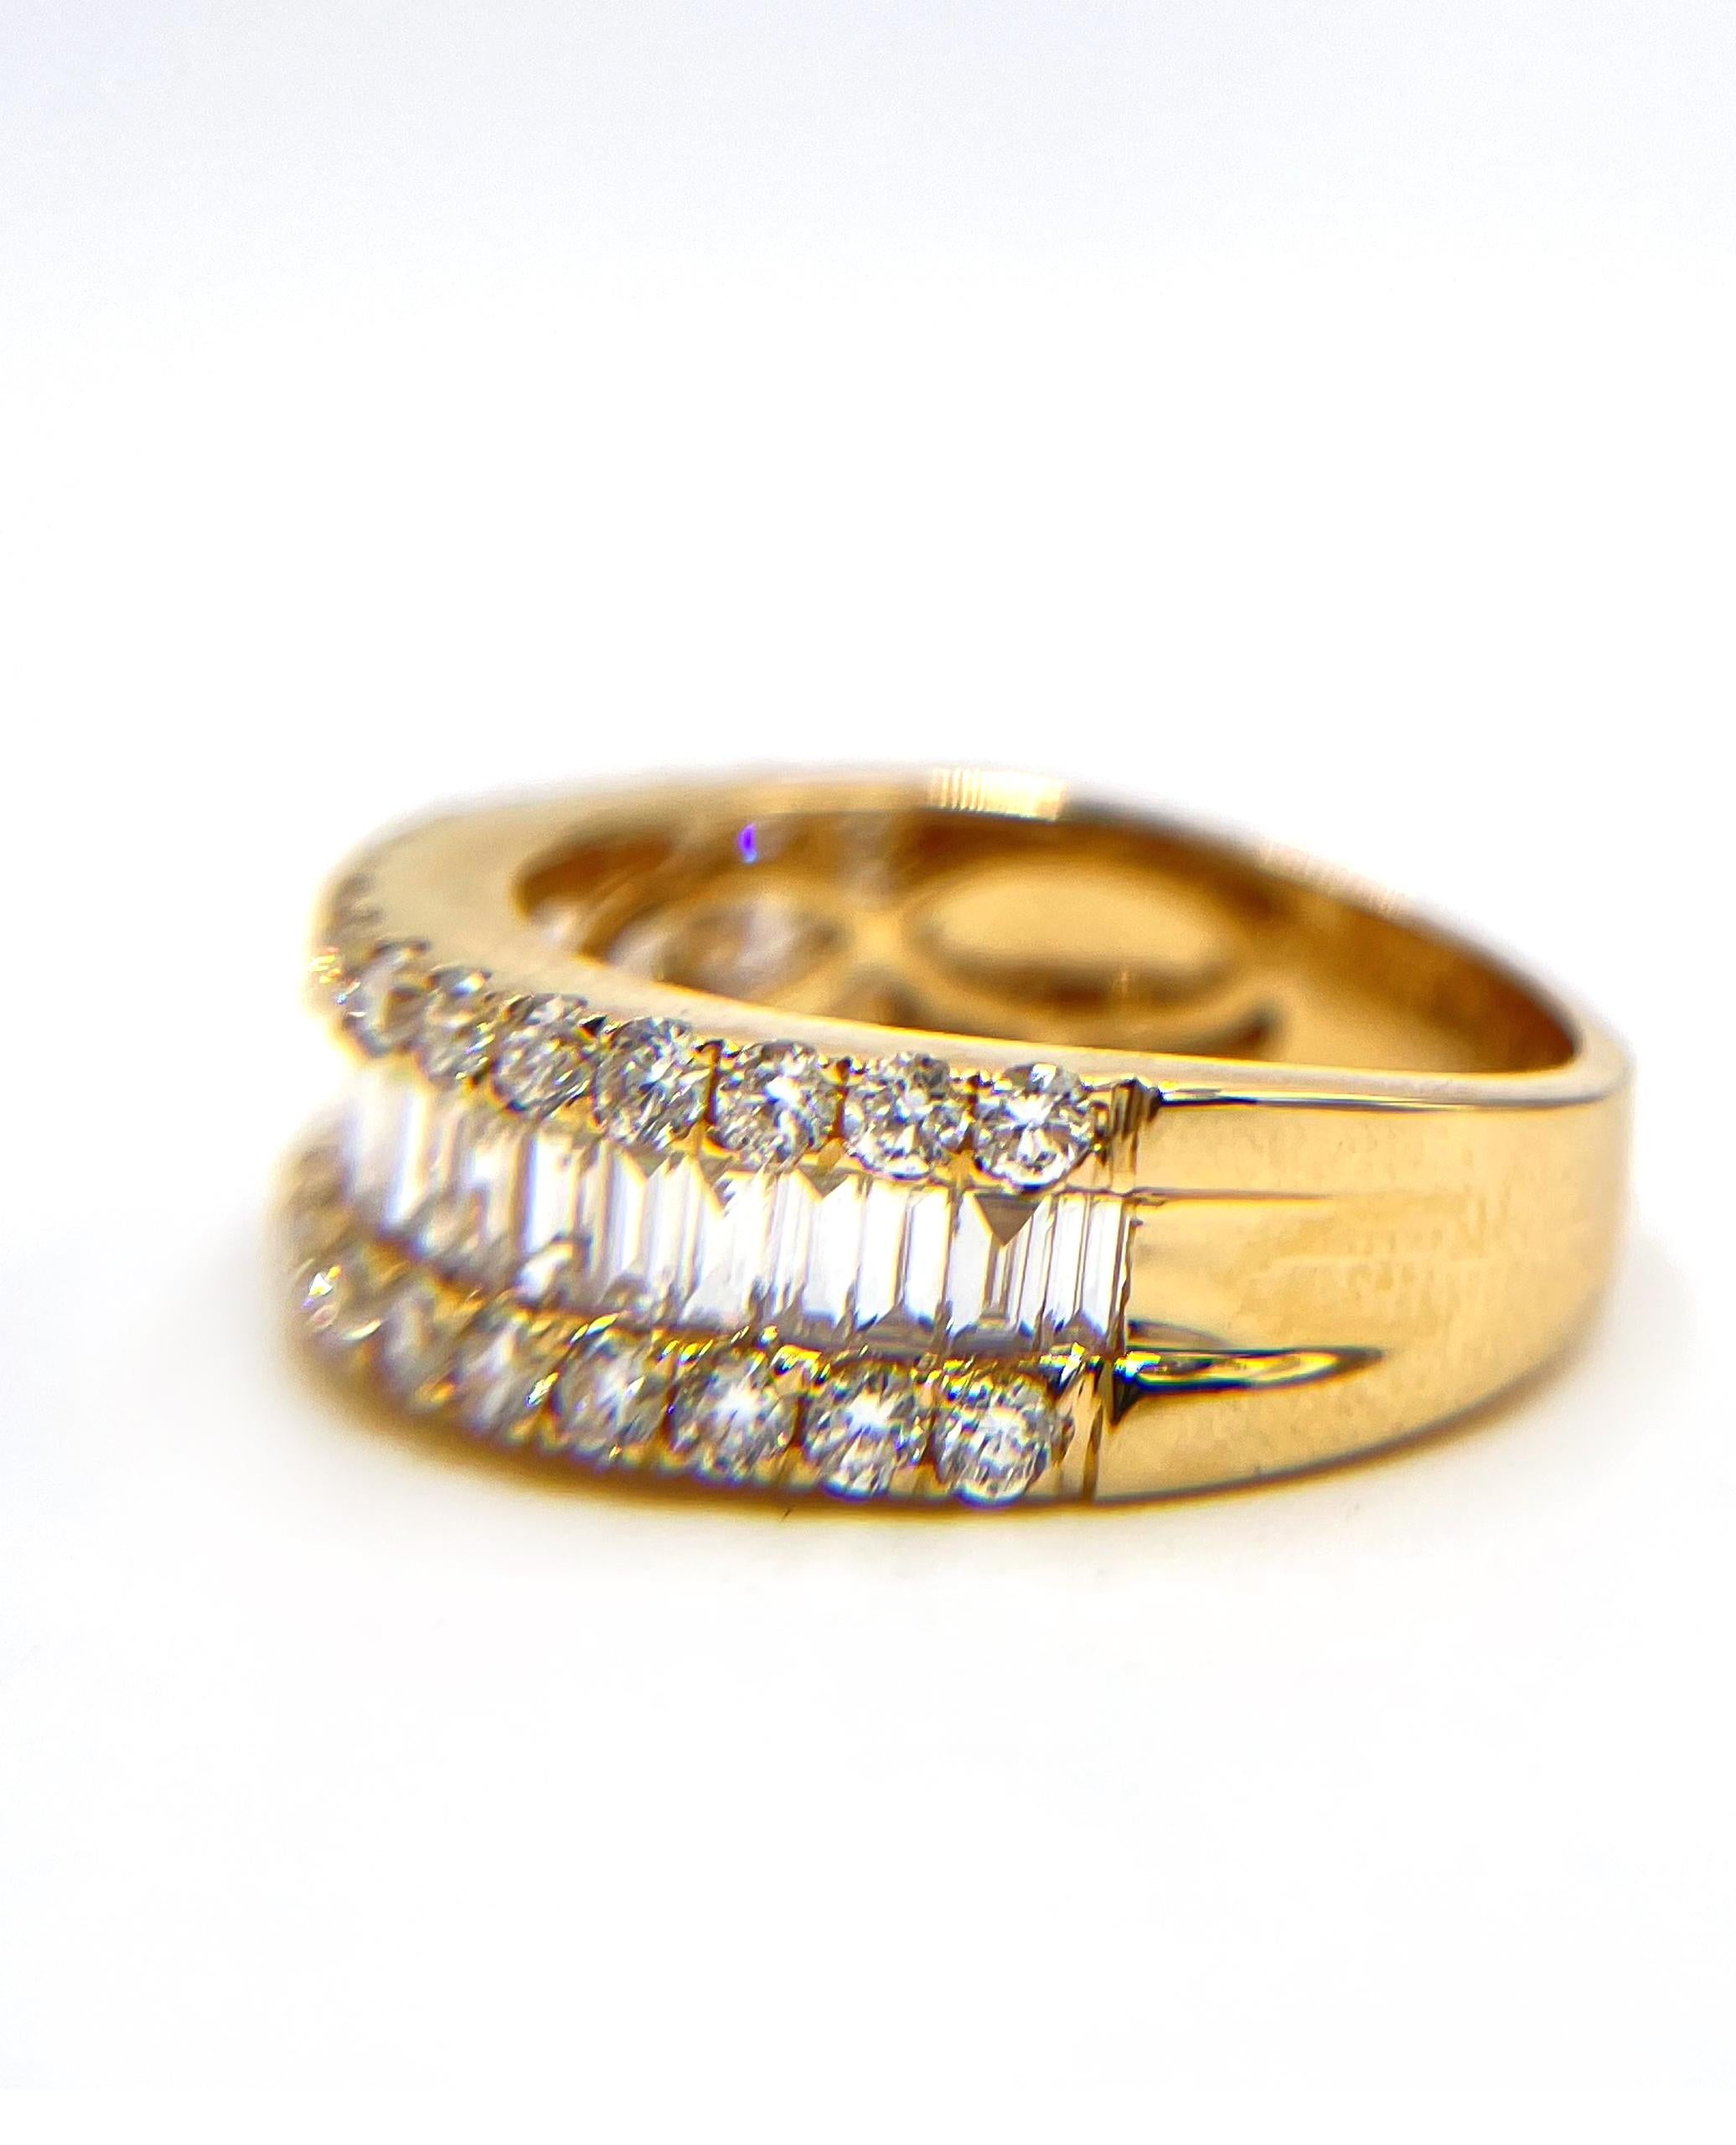 Classic round diamond and baguette ring.  This ring is made of 18K yellow gold and is furnished with a center row of baguette diamonds and two rows of round brilliant-cut diamonds.  Total diamond weight is 1.31 carats.

* Finger size 6.5